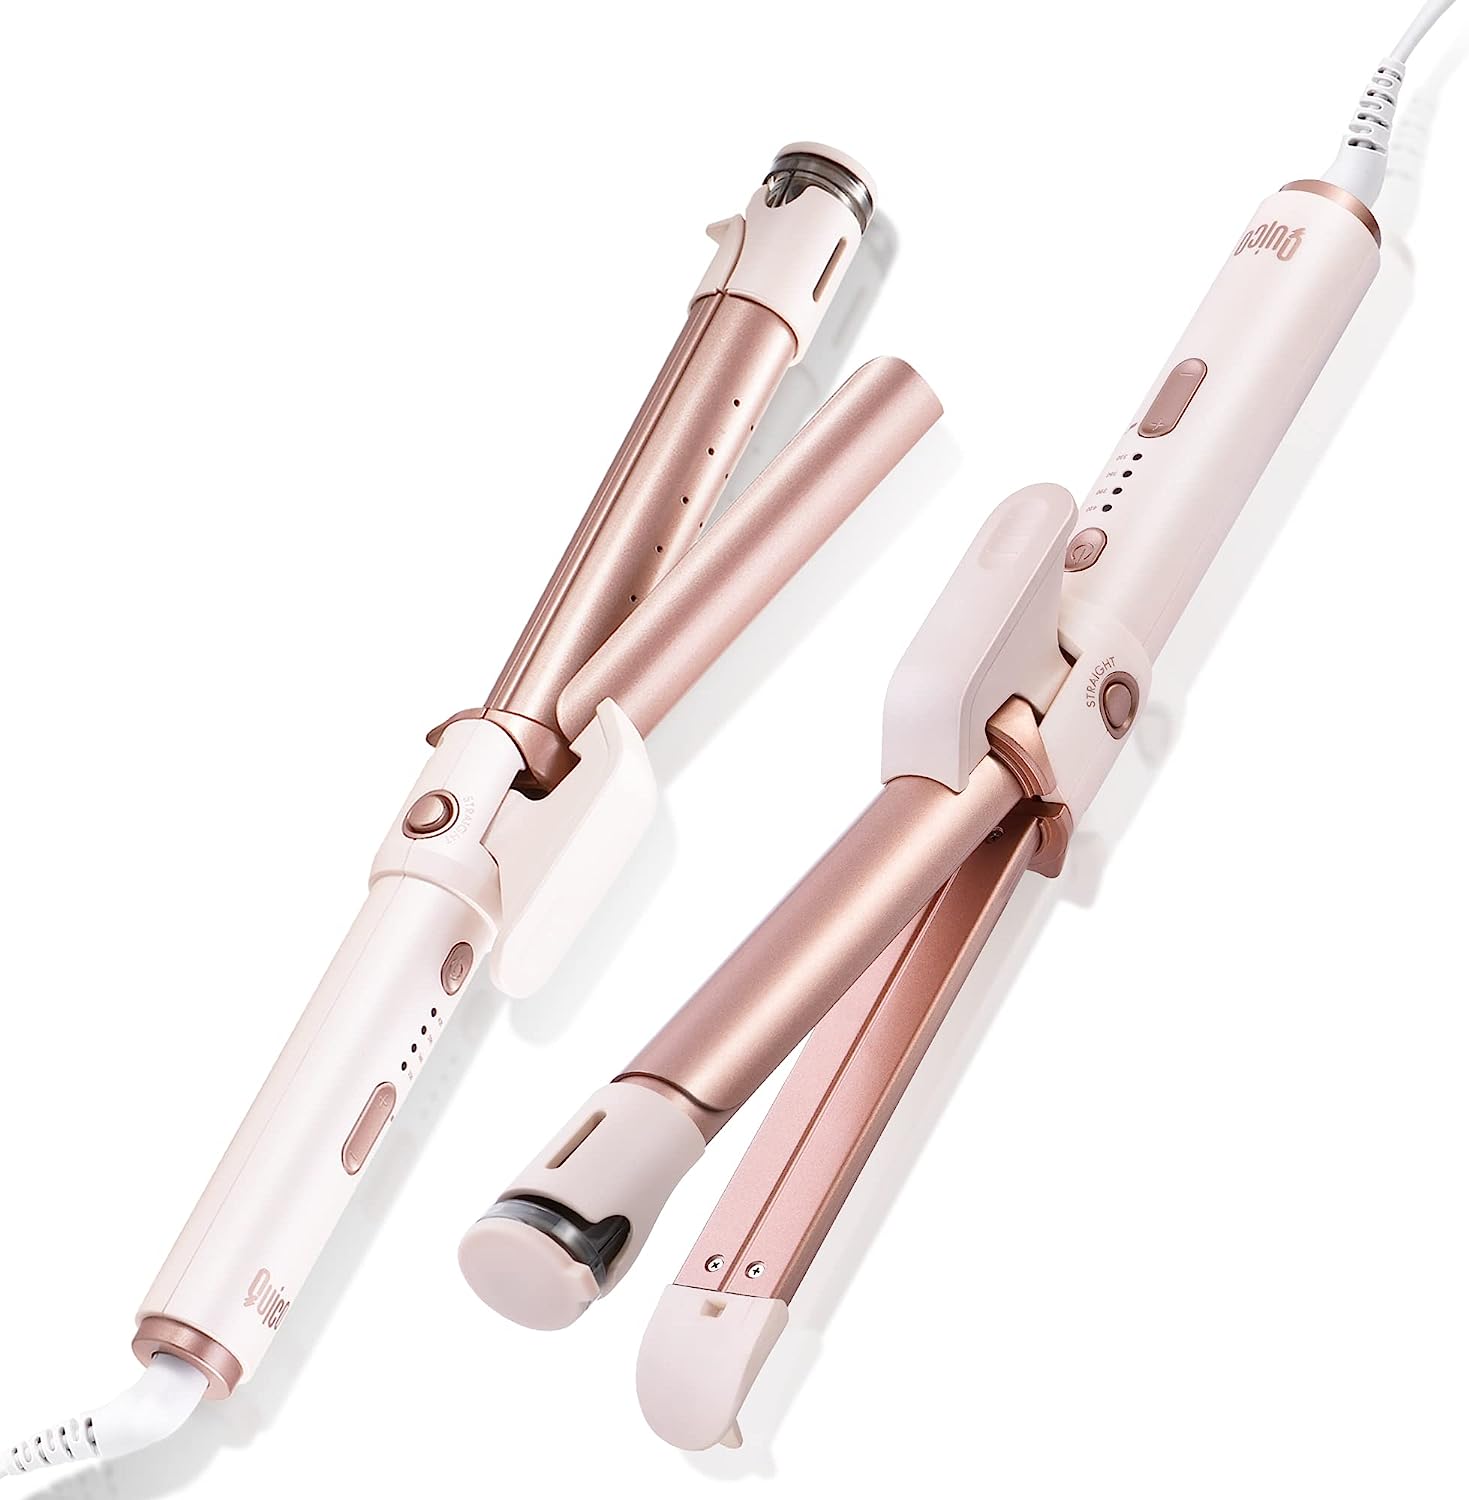 QUICO Professional 2-in-1 Hair Straightener and [...]